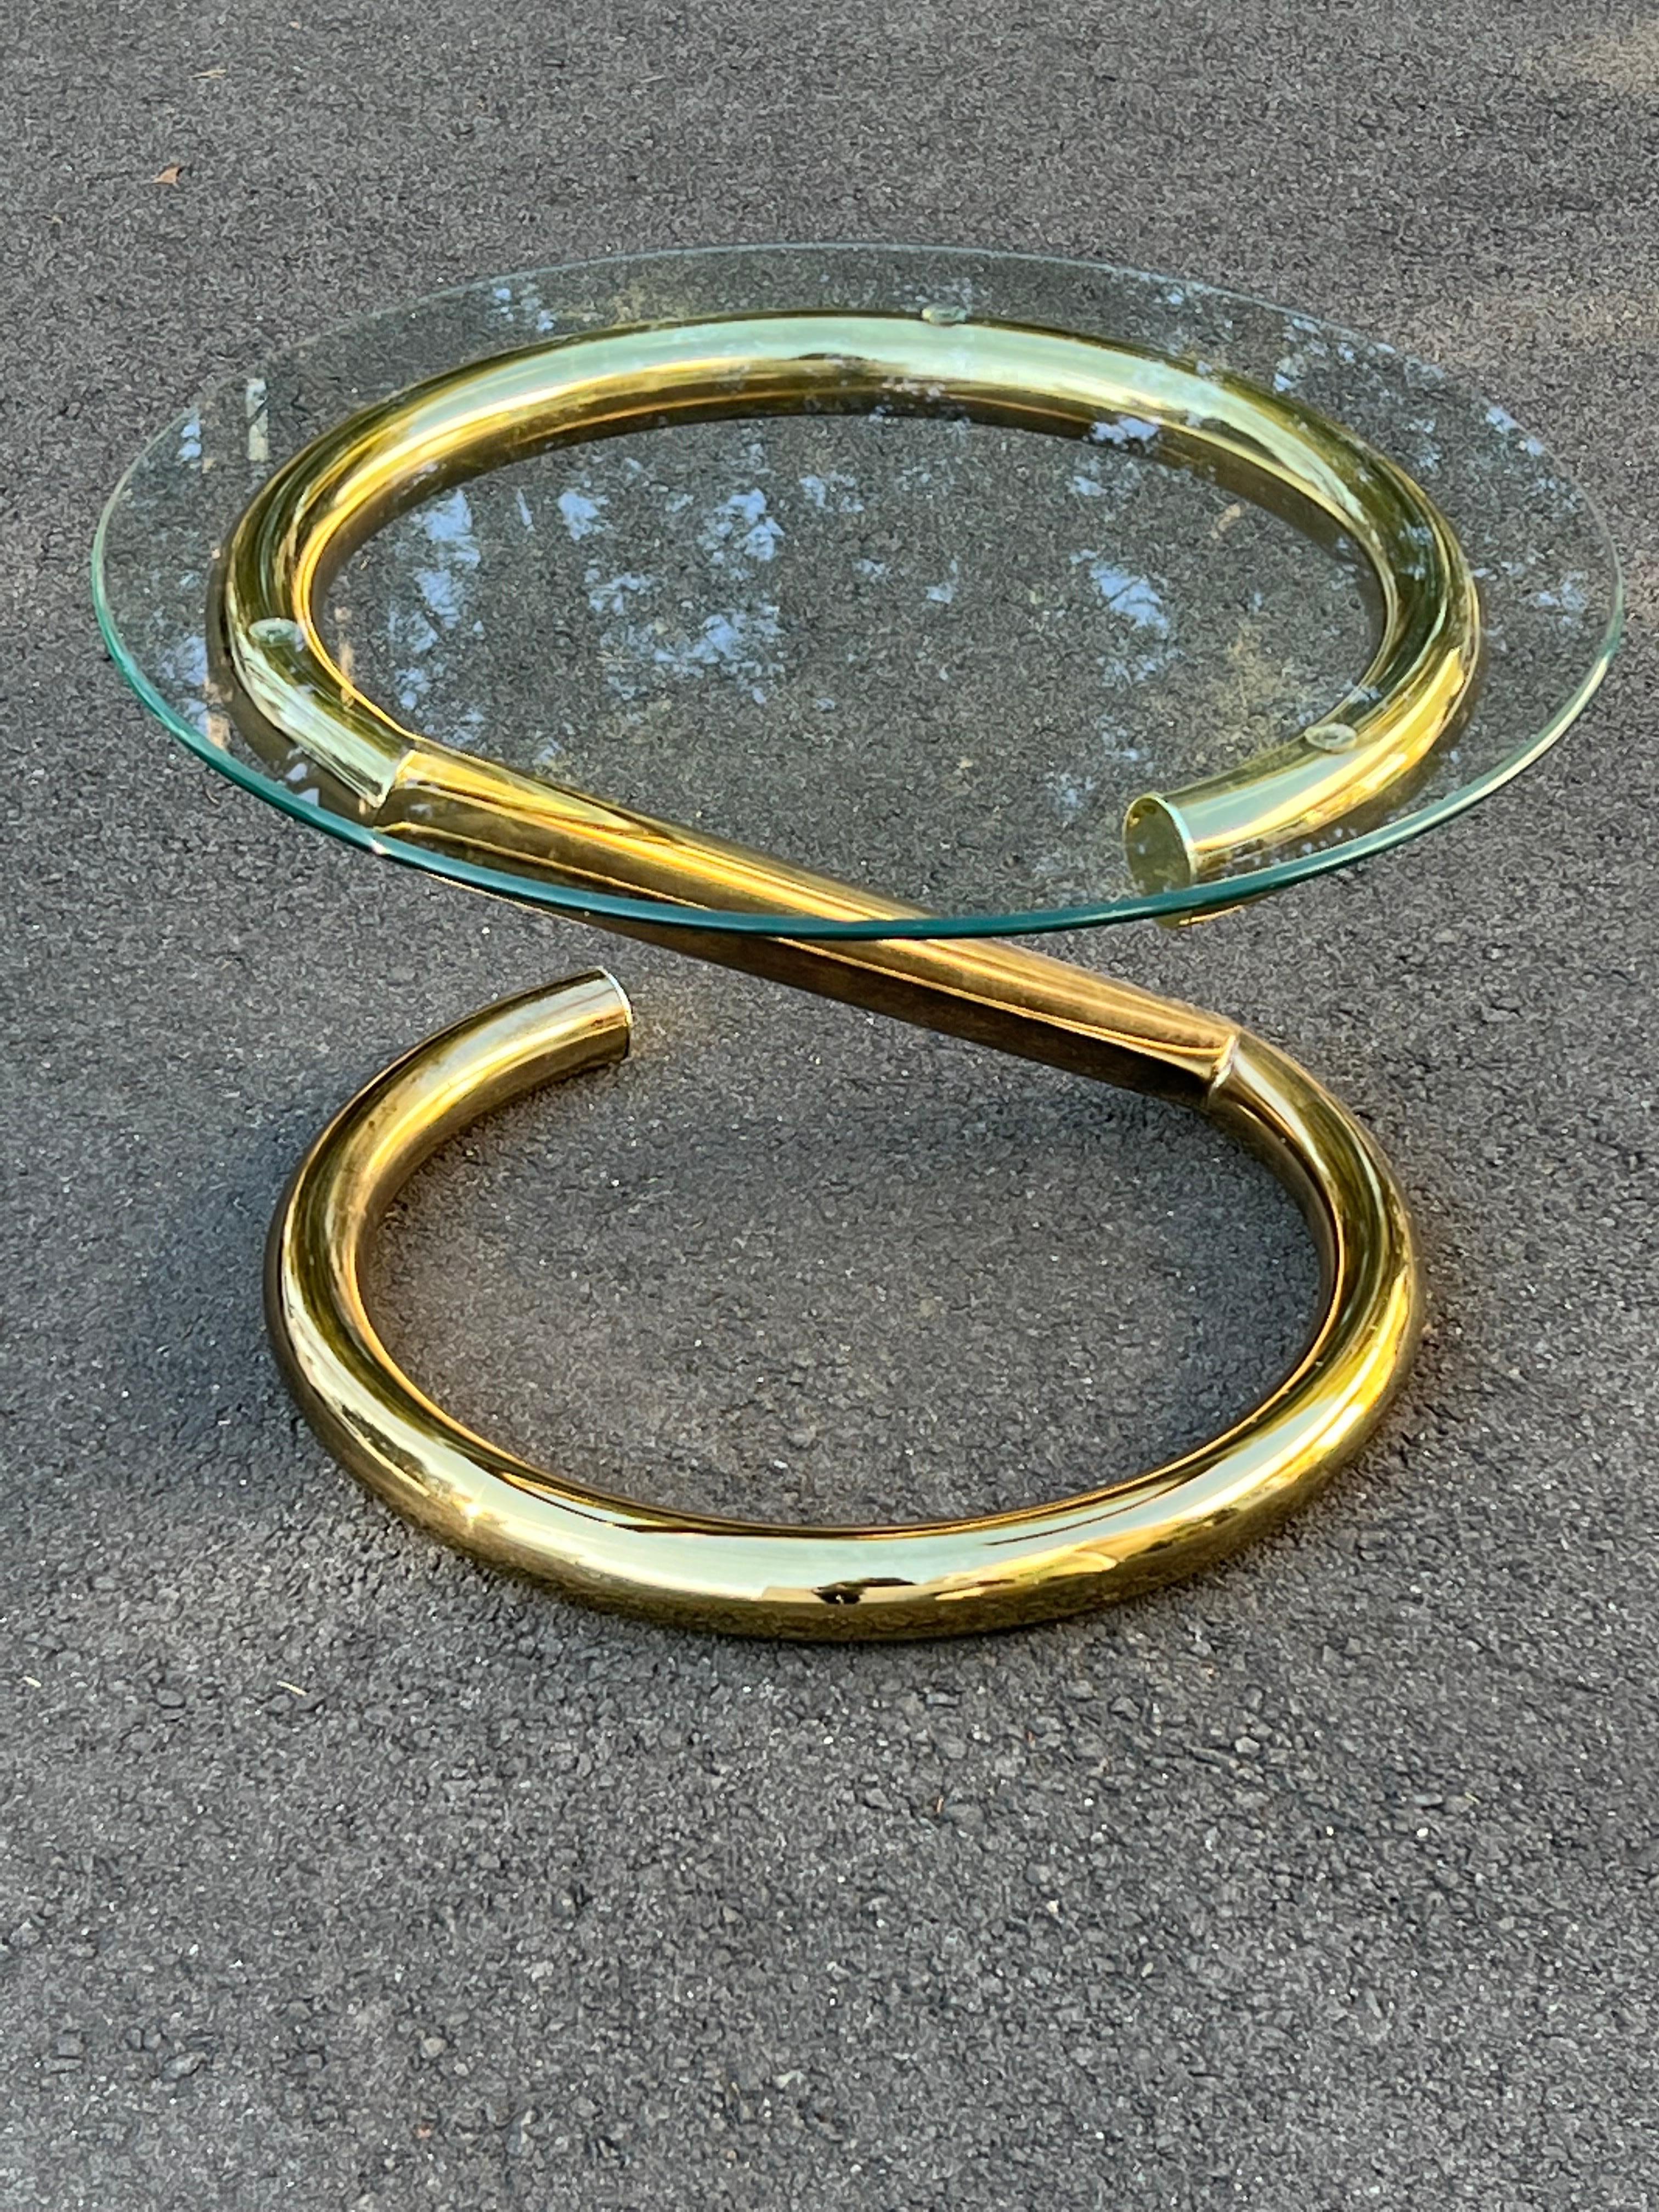 Karl Springer style round “Z” table in brass. Nice open geometric design. Two pieces. 
Perfect as a side table or small coffee table. Two pices. Glass removeable for easy transport. The base can easily be parcel shipped if you want to purchase